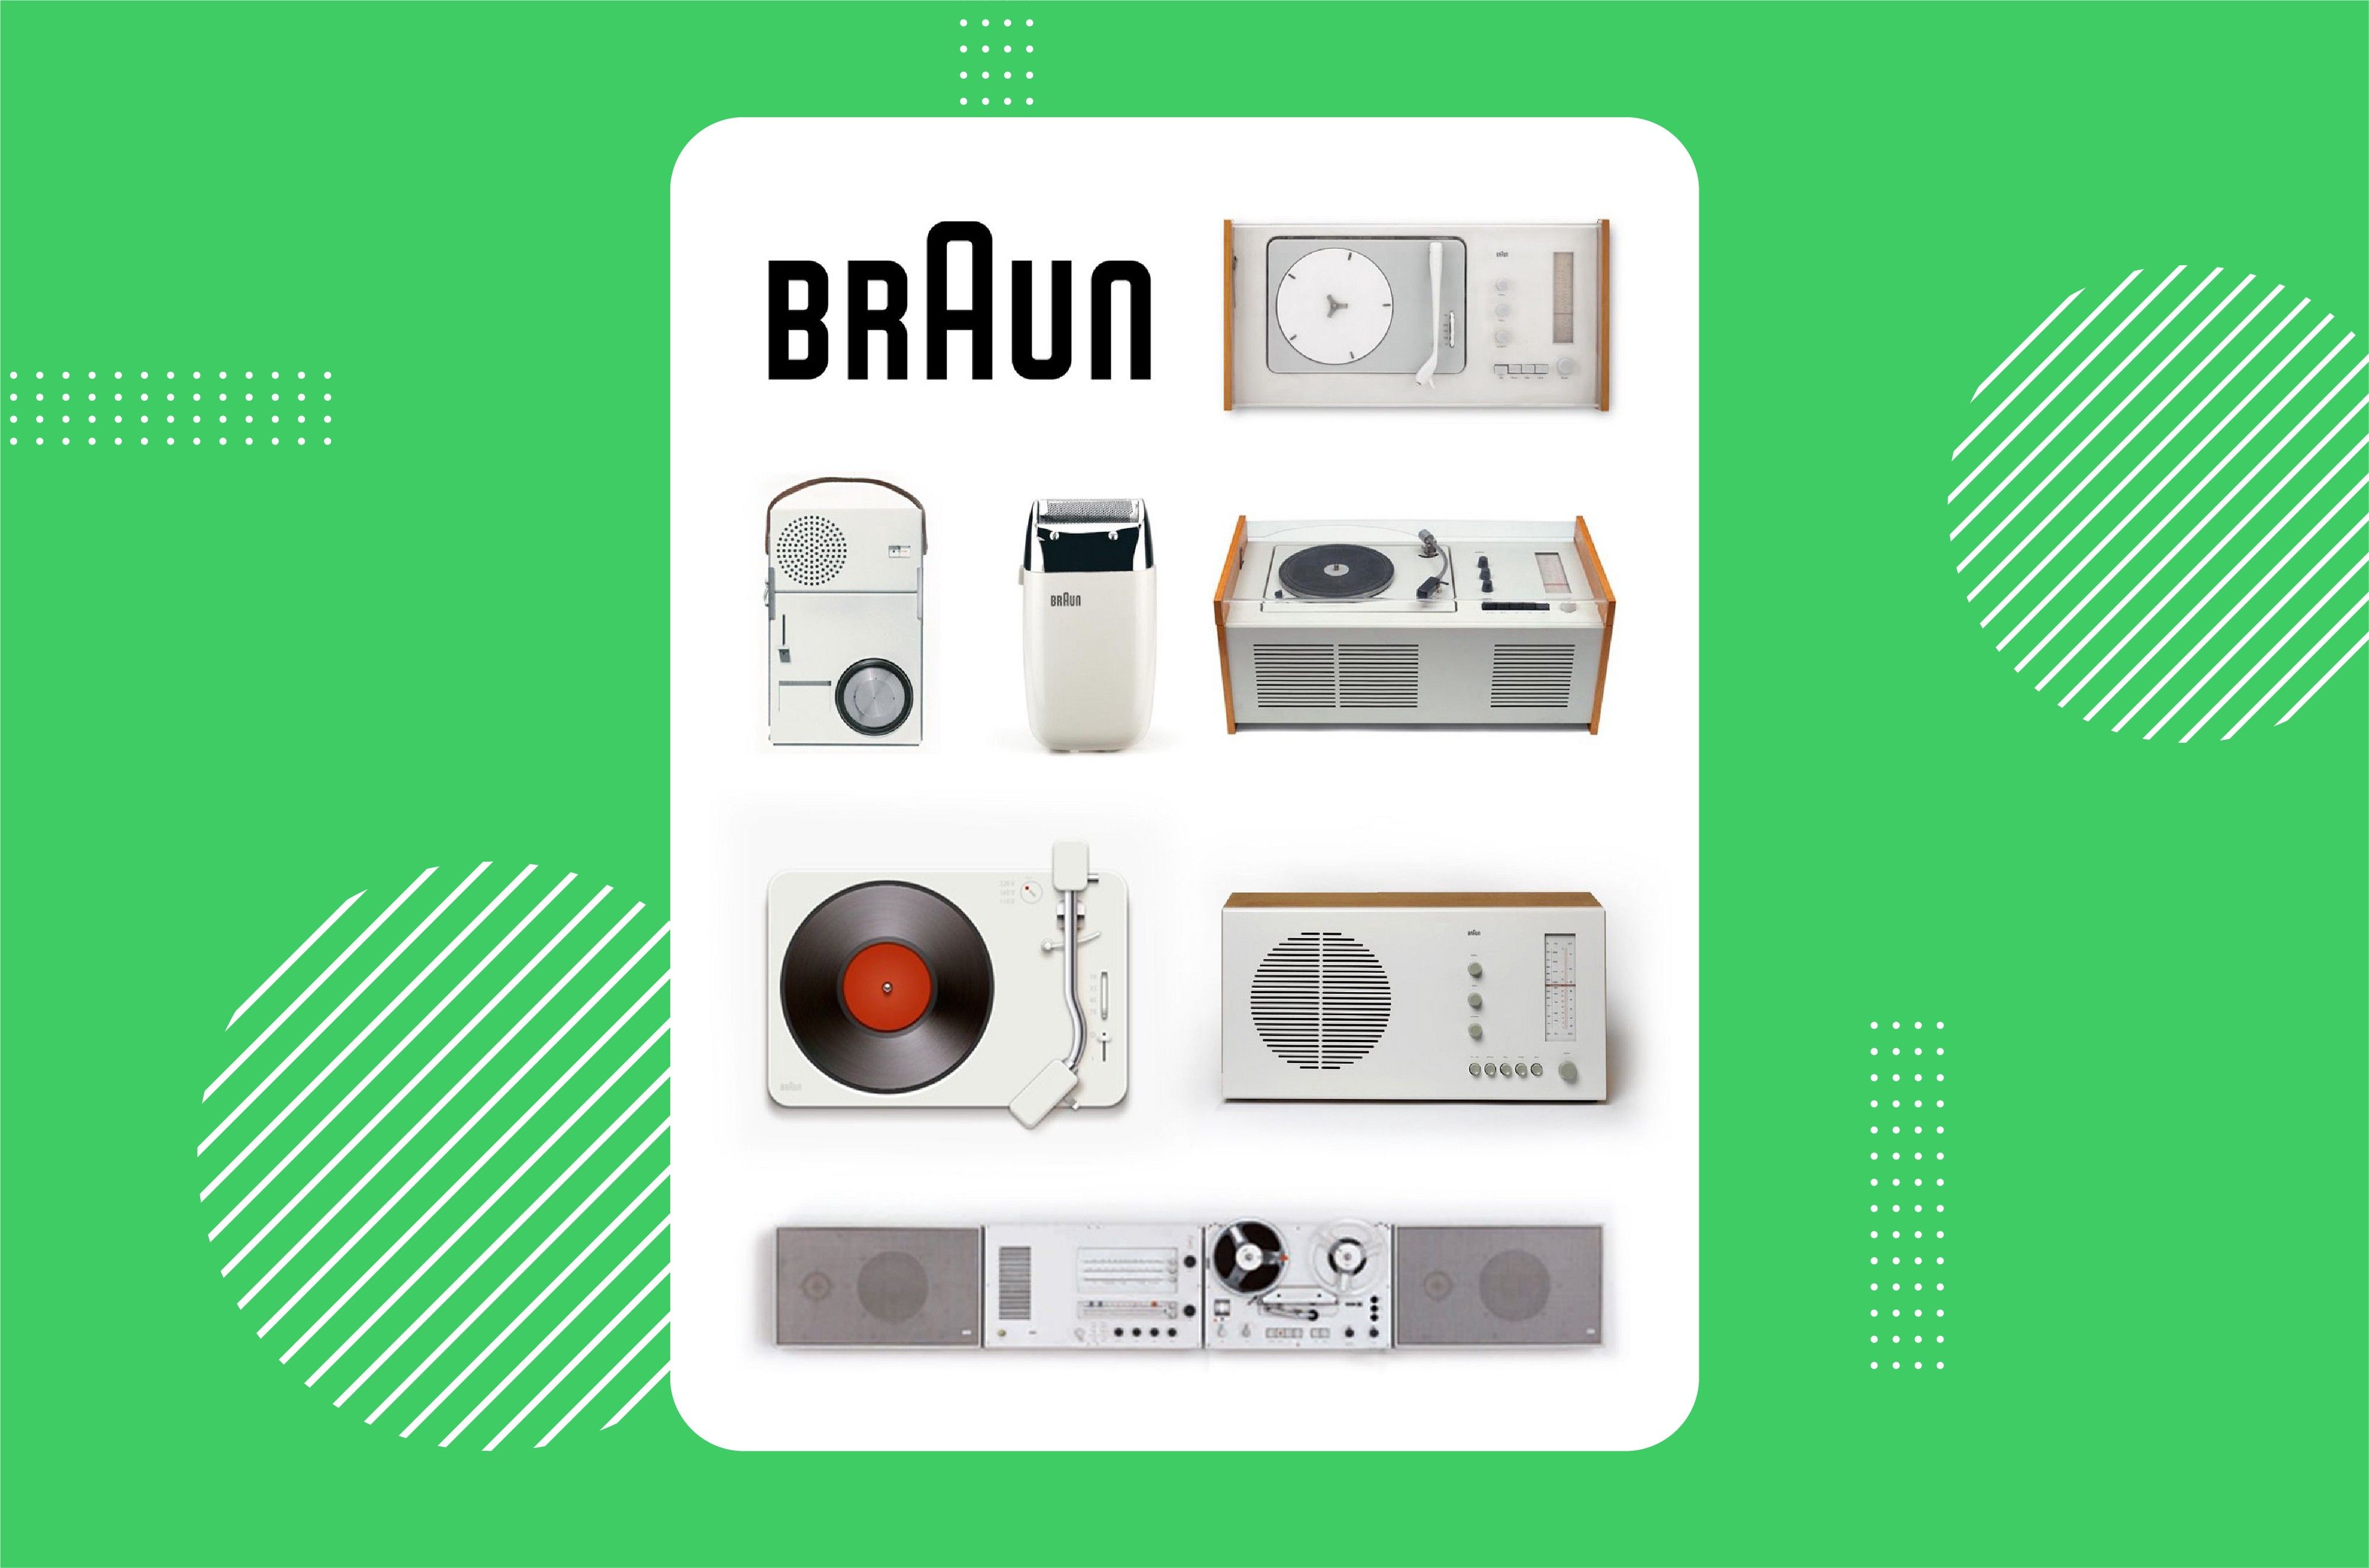 A family of Braun products from the article on 11 life lessons from influential product designer Dieter Rams